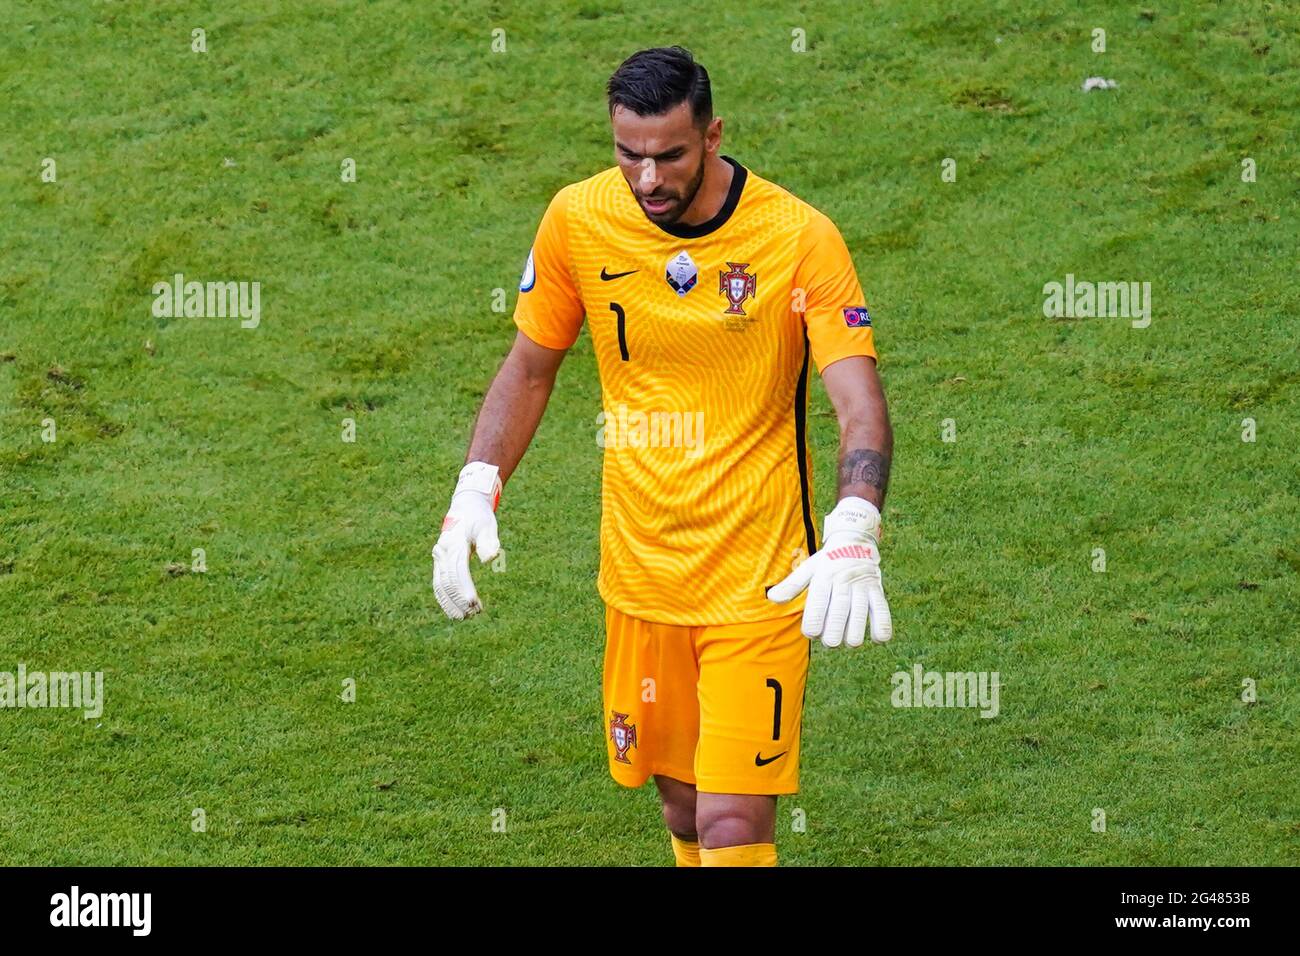 MUNCHEN, GERMANY - JUNE 19: Rui Patricio of Portugal during the UEFA Euro 2020 Group F match between Portugal and Germany at Allianz Arena on June 19, 2021 in Munchen, Germany (Photo by Andre Weening/Orange Pictures) Stock Photo